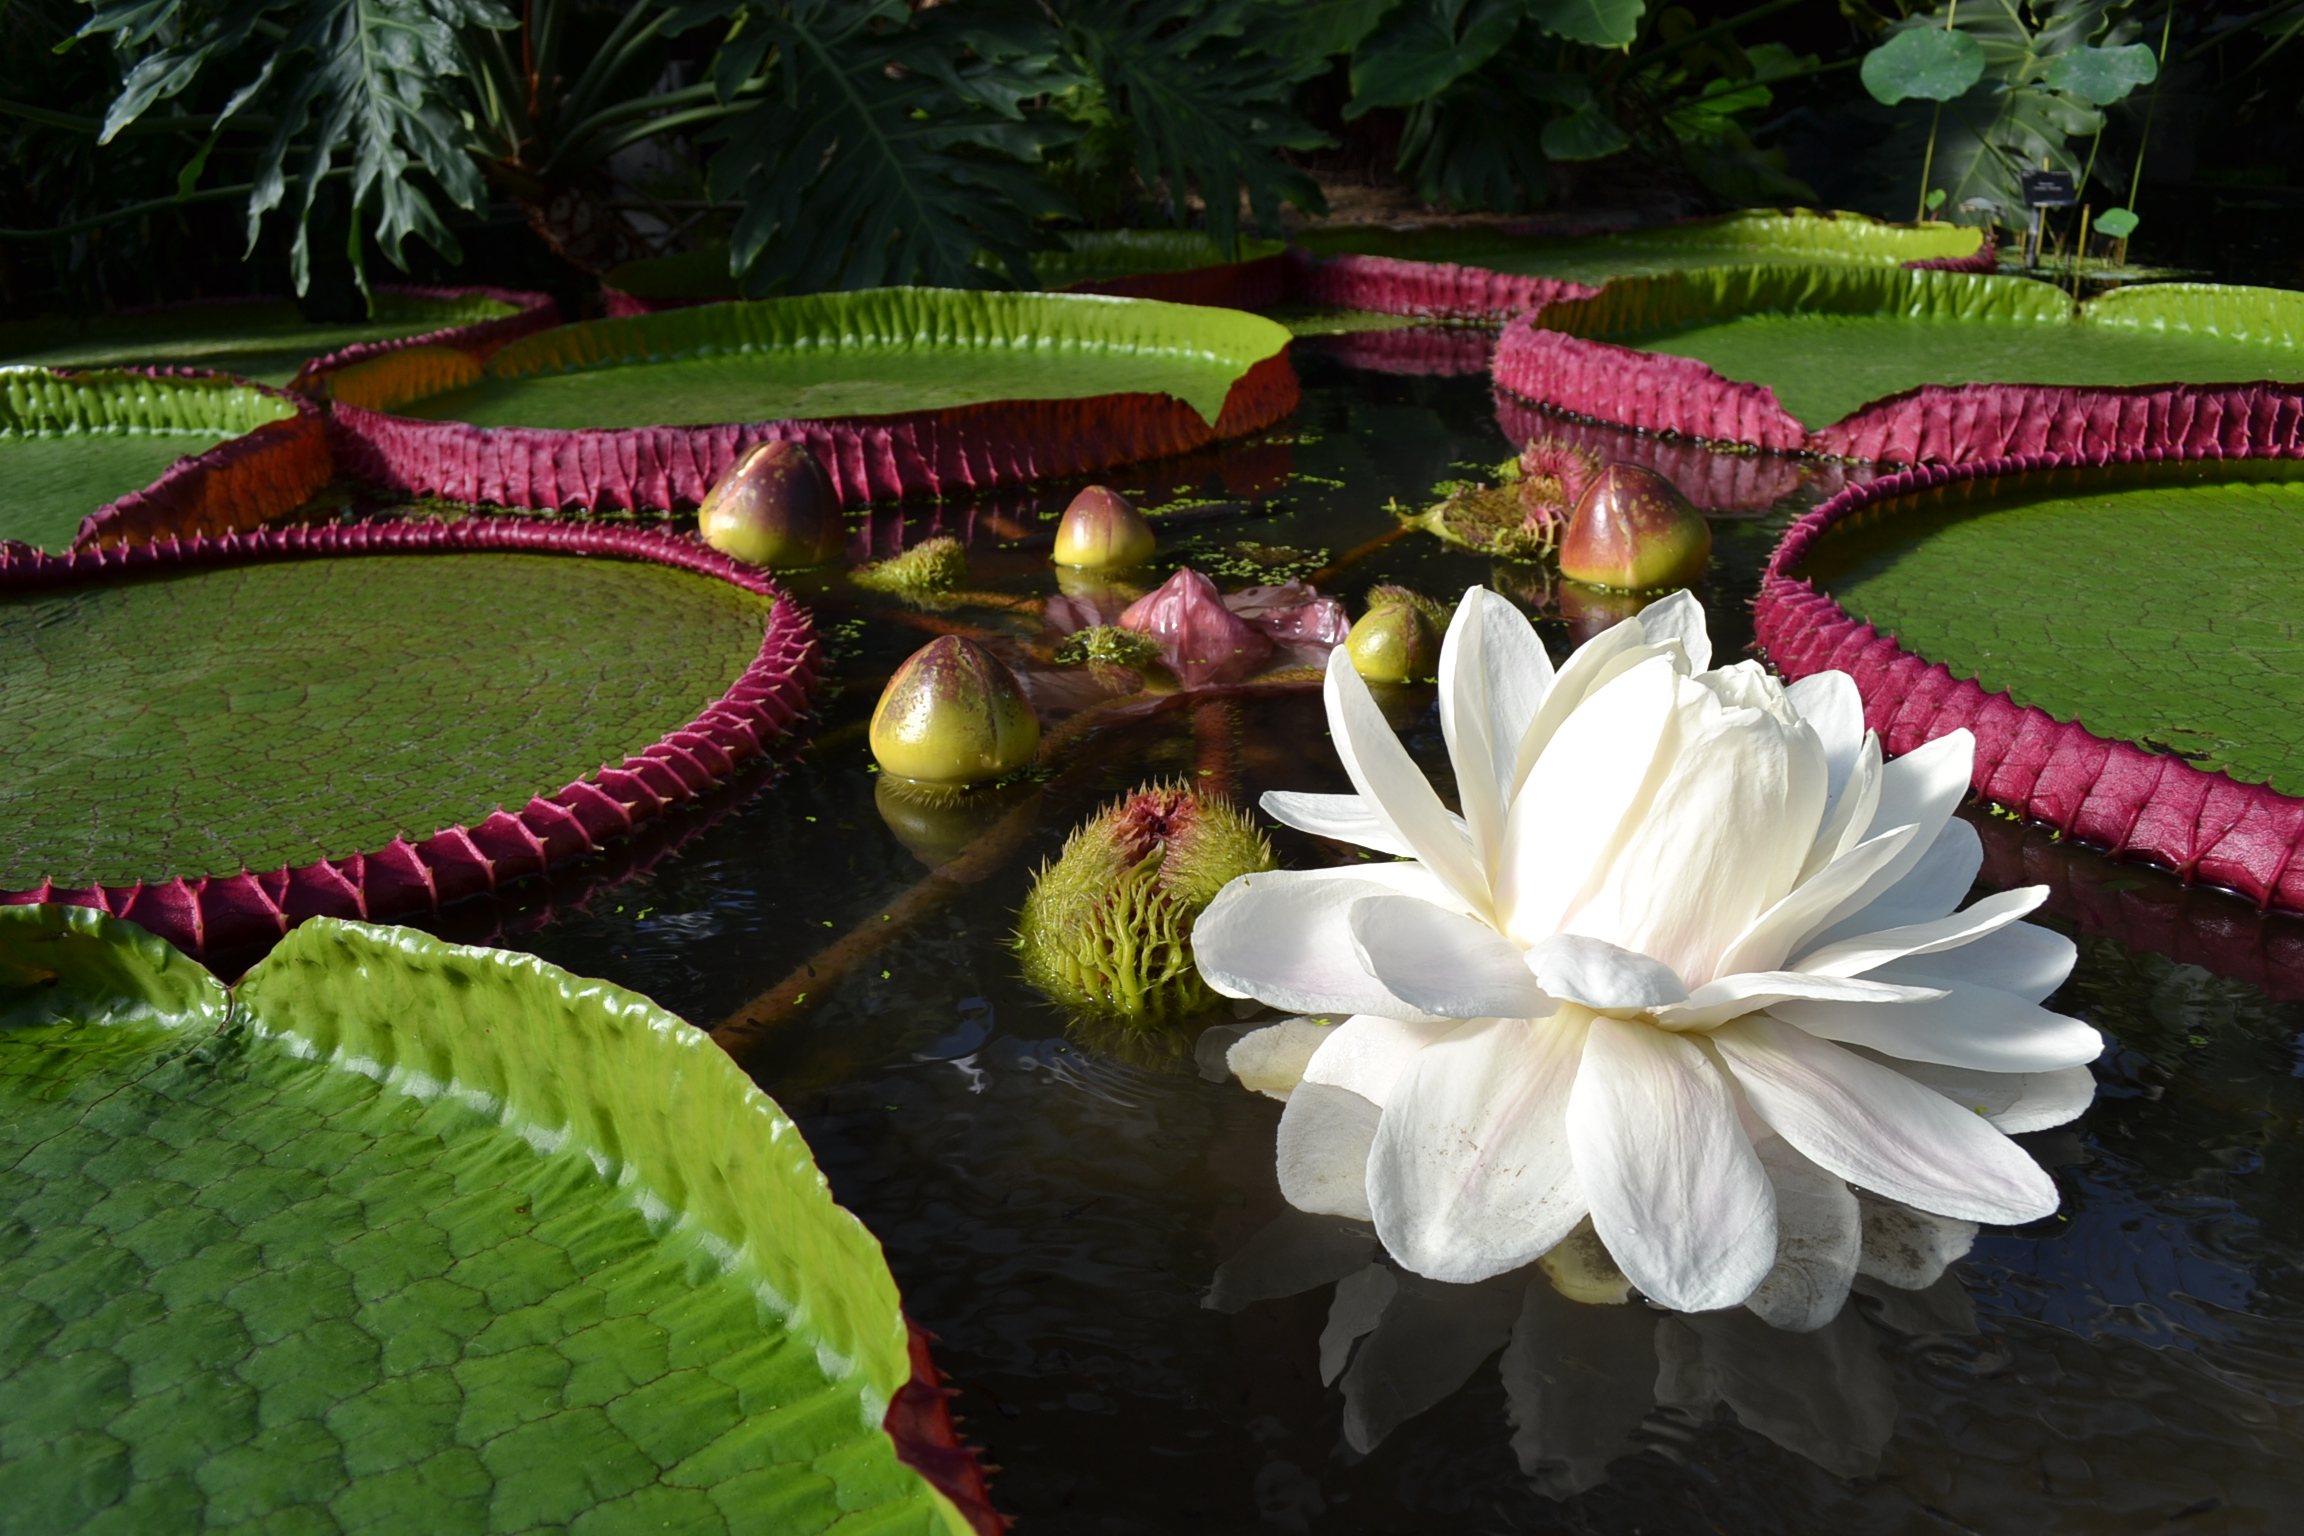 The Bolivian giant water lily (Victoria boliviana).